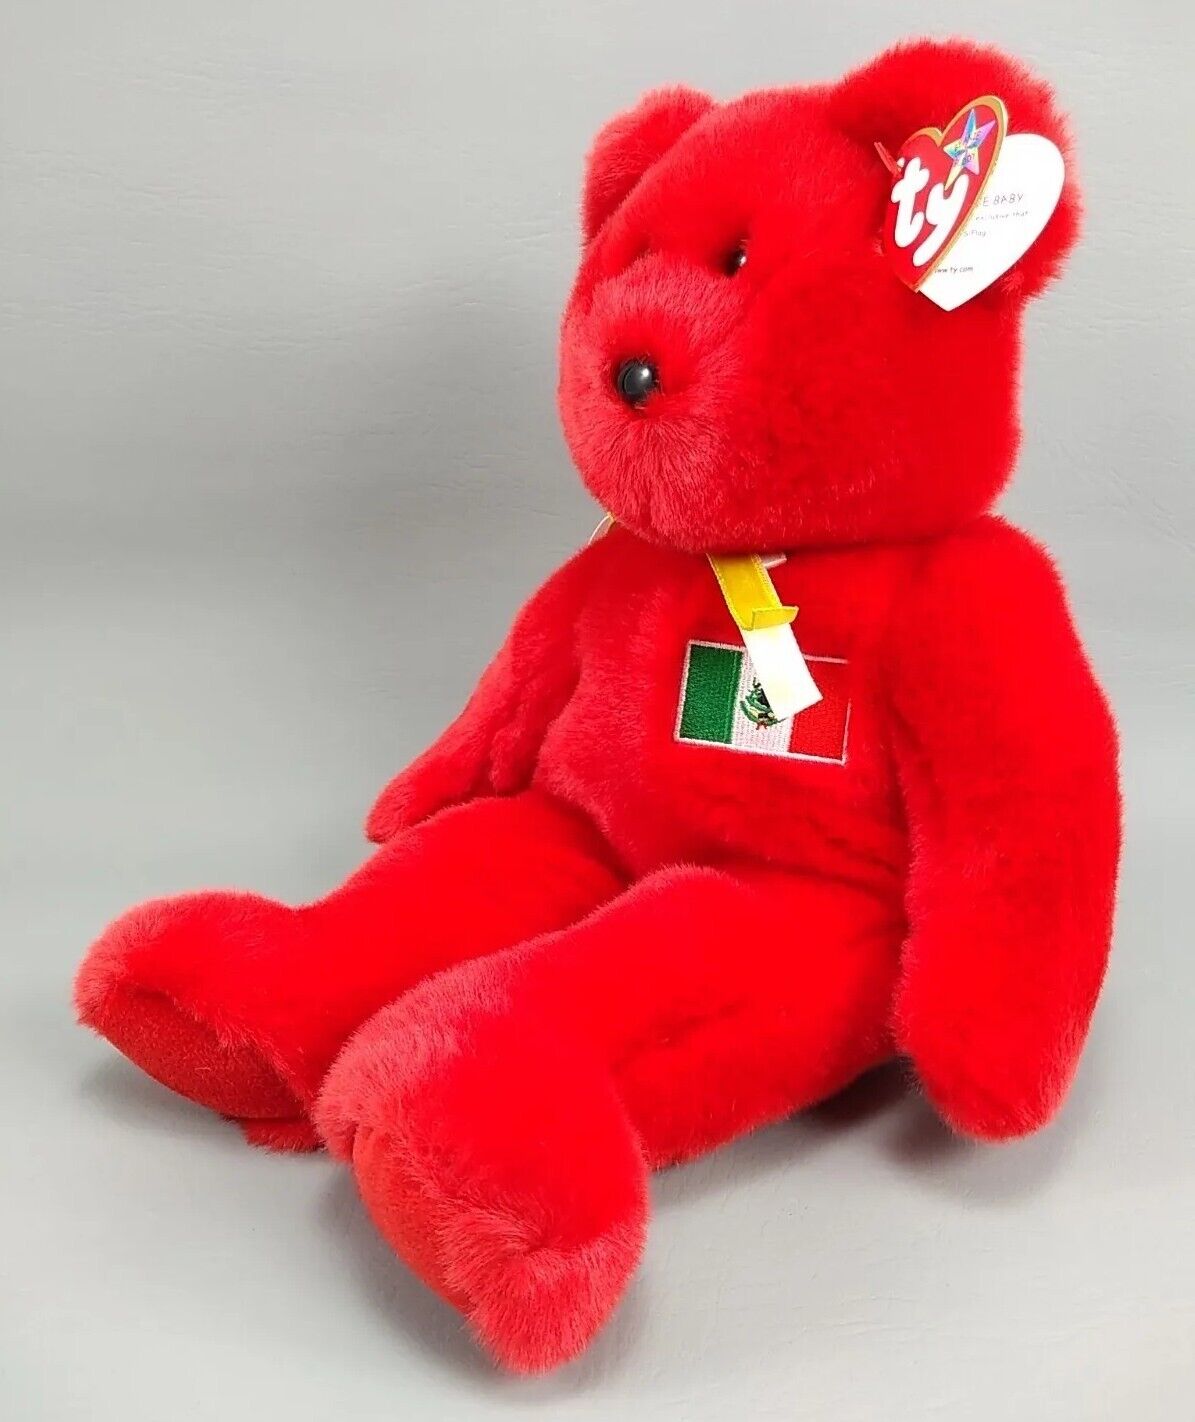 Ty Beanie Buddy Osito the Mexican Bear Large 15" 1999 Retired Plush Toy MwMT Ty